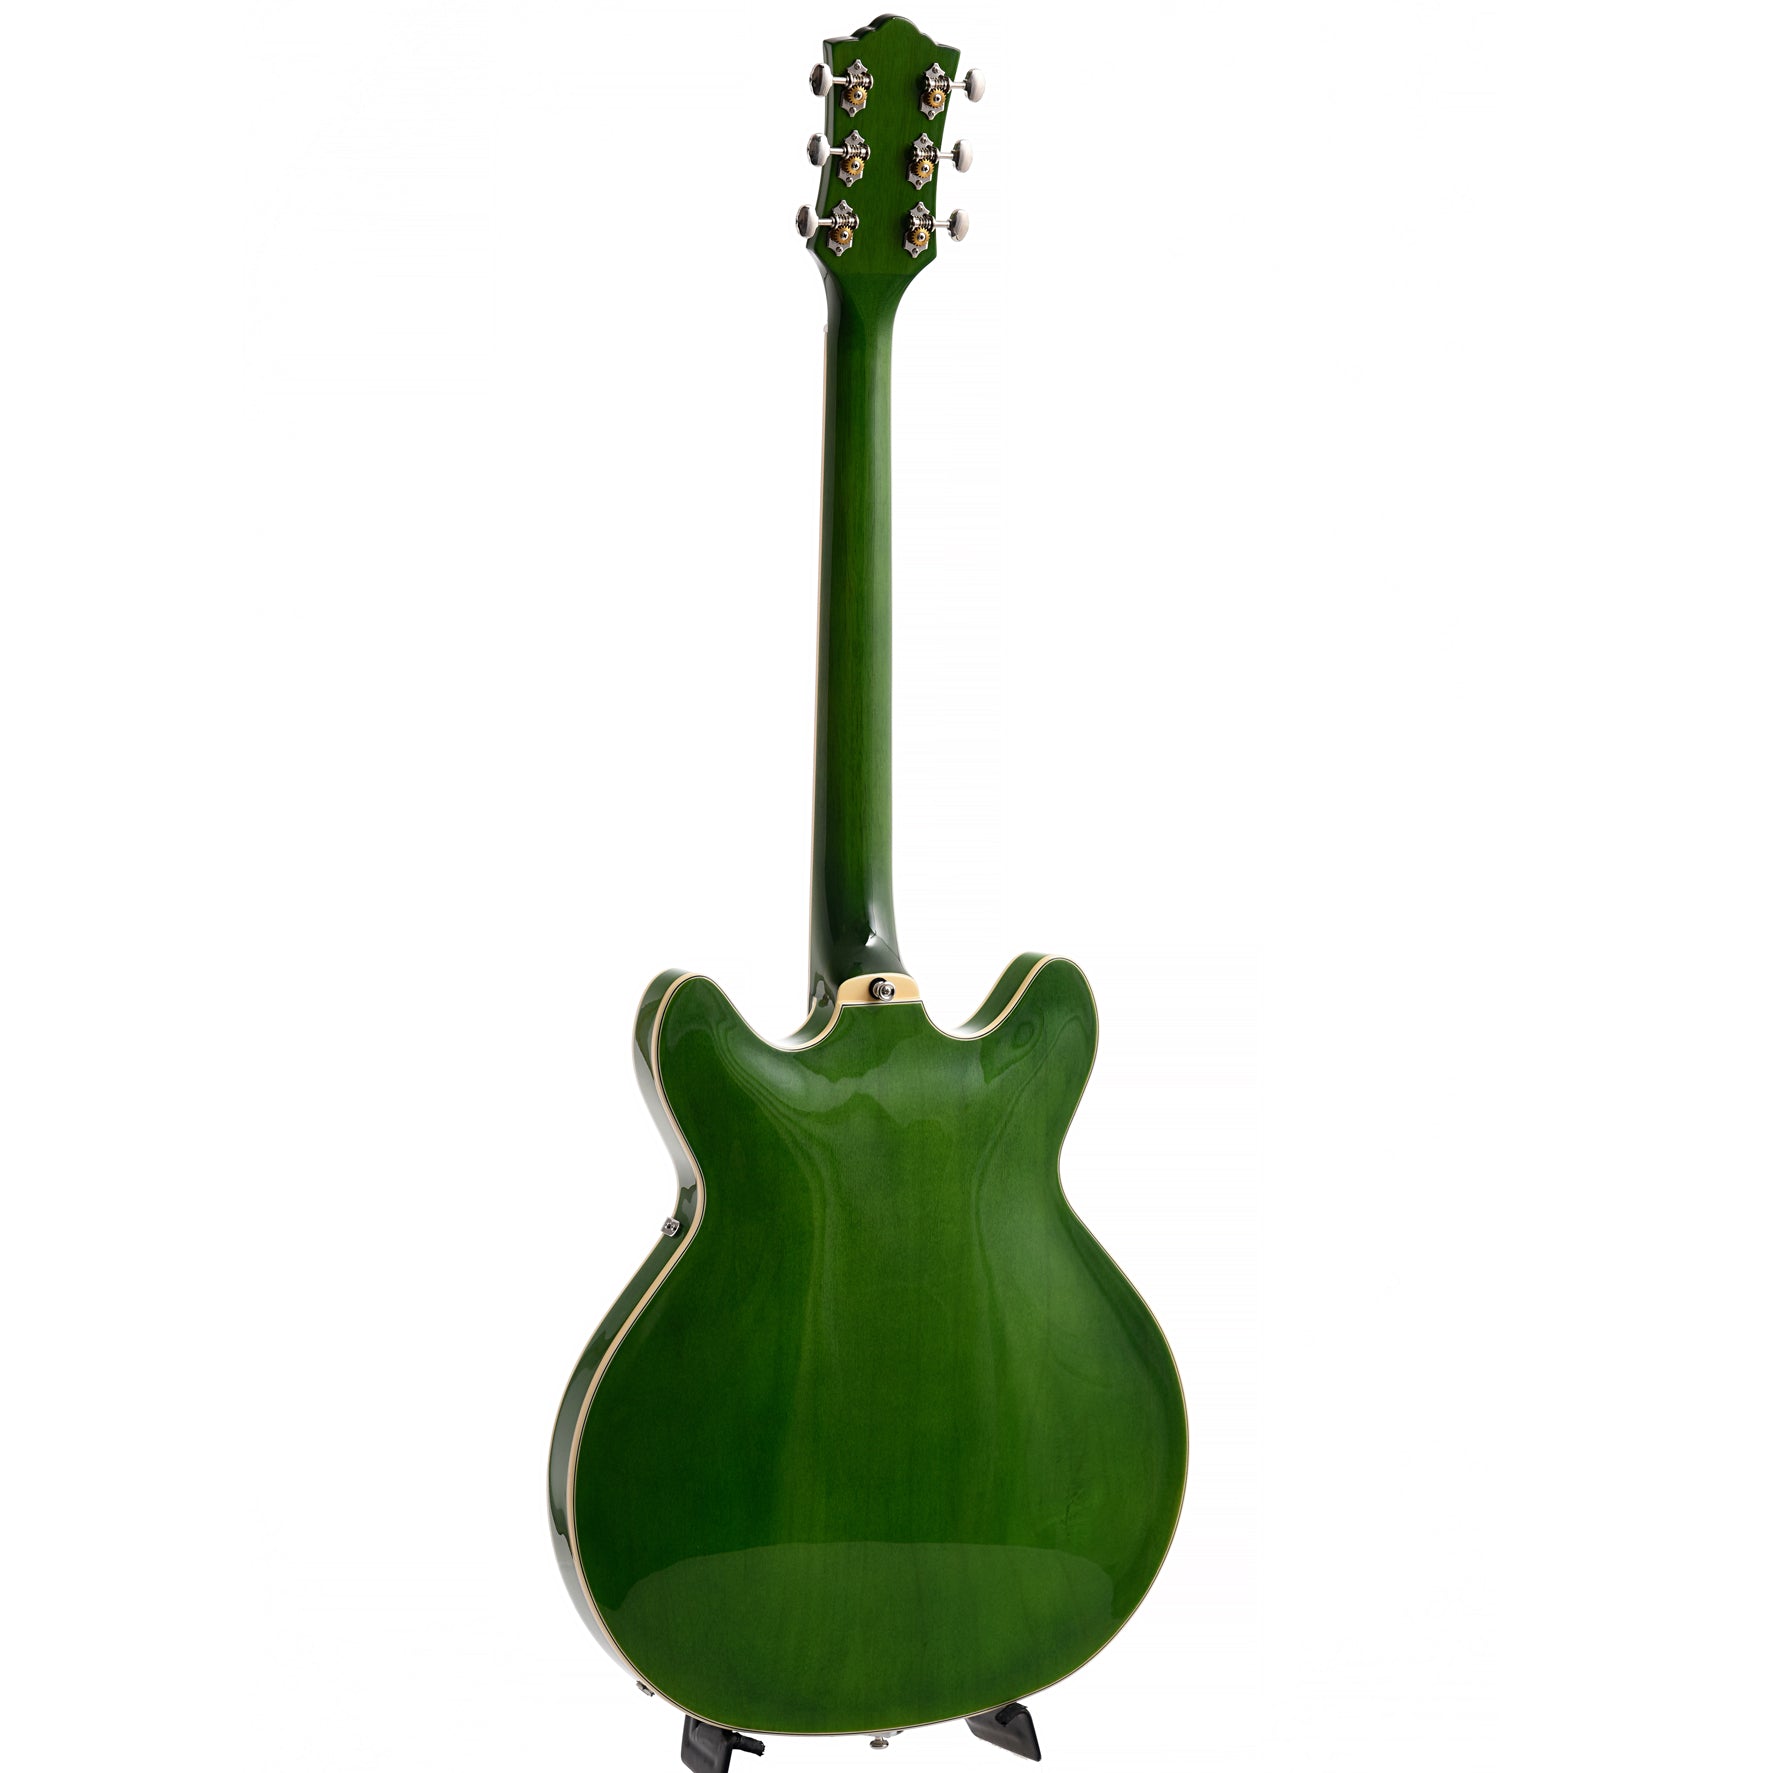 Image 10 of Guild Starfire I Double Cutaway Semi-Hollow Body Guitar with Vibrato, Emerald Green - SKU# GSF1DCV-GRN : Product Type Hollow Body Electric Guitars : Elderly Instruments